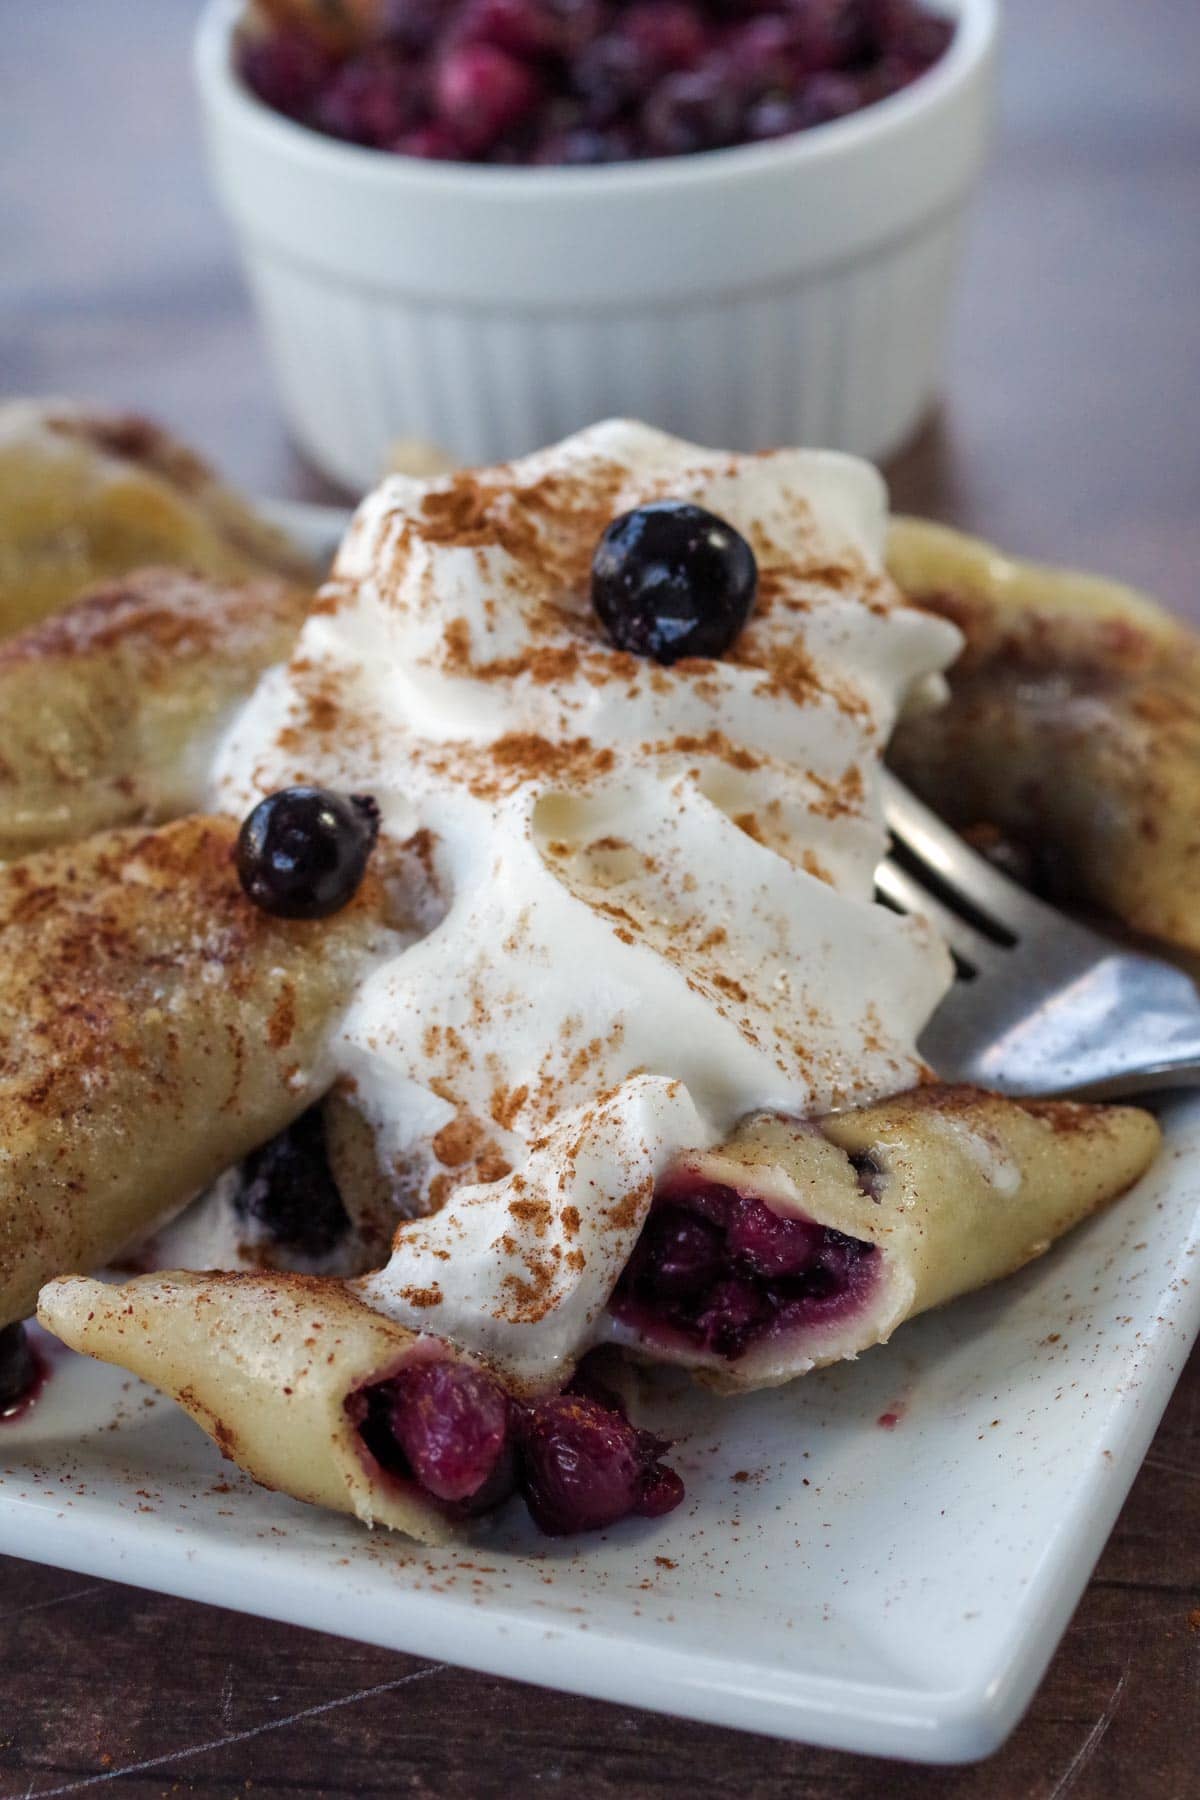 Sasktoon berry perogies with cinnamon and whipped cream, on a white plate with a dish of Saskatoon berry filling in the background